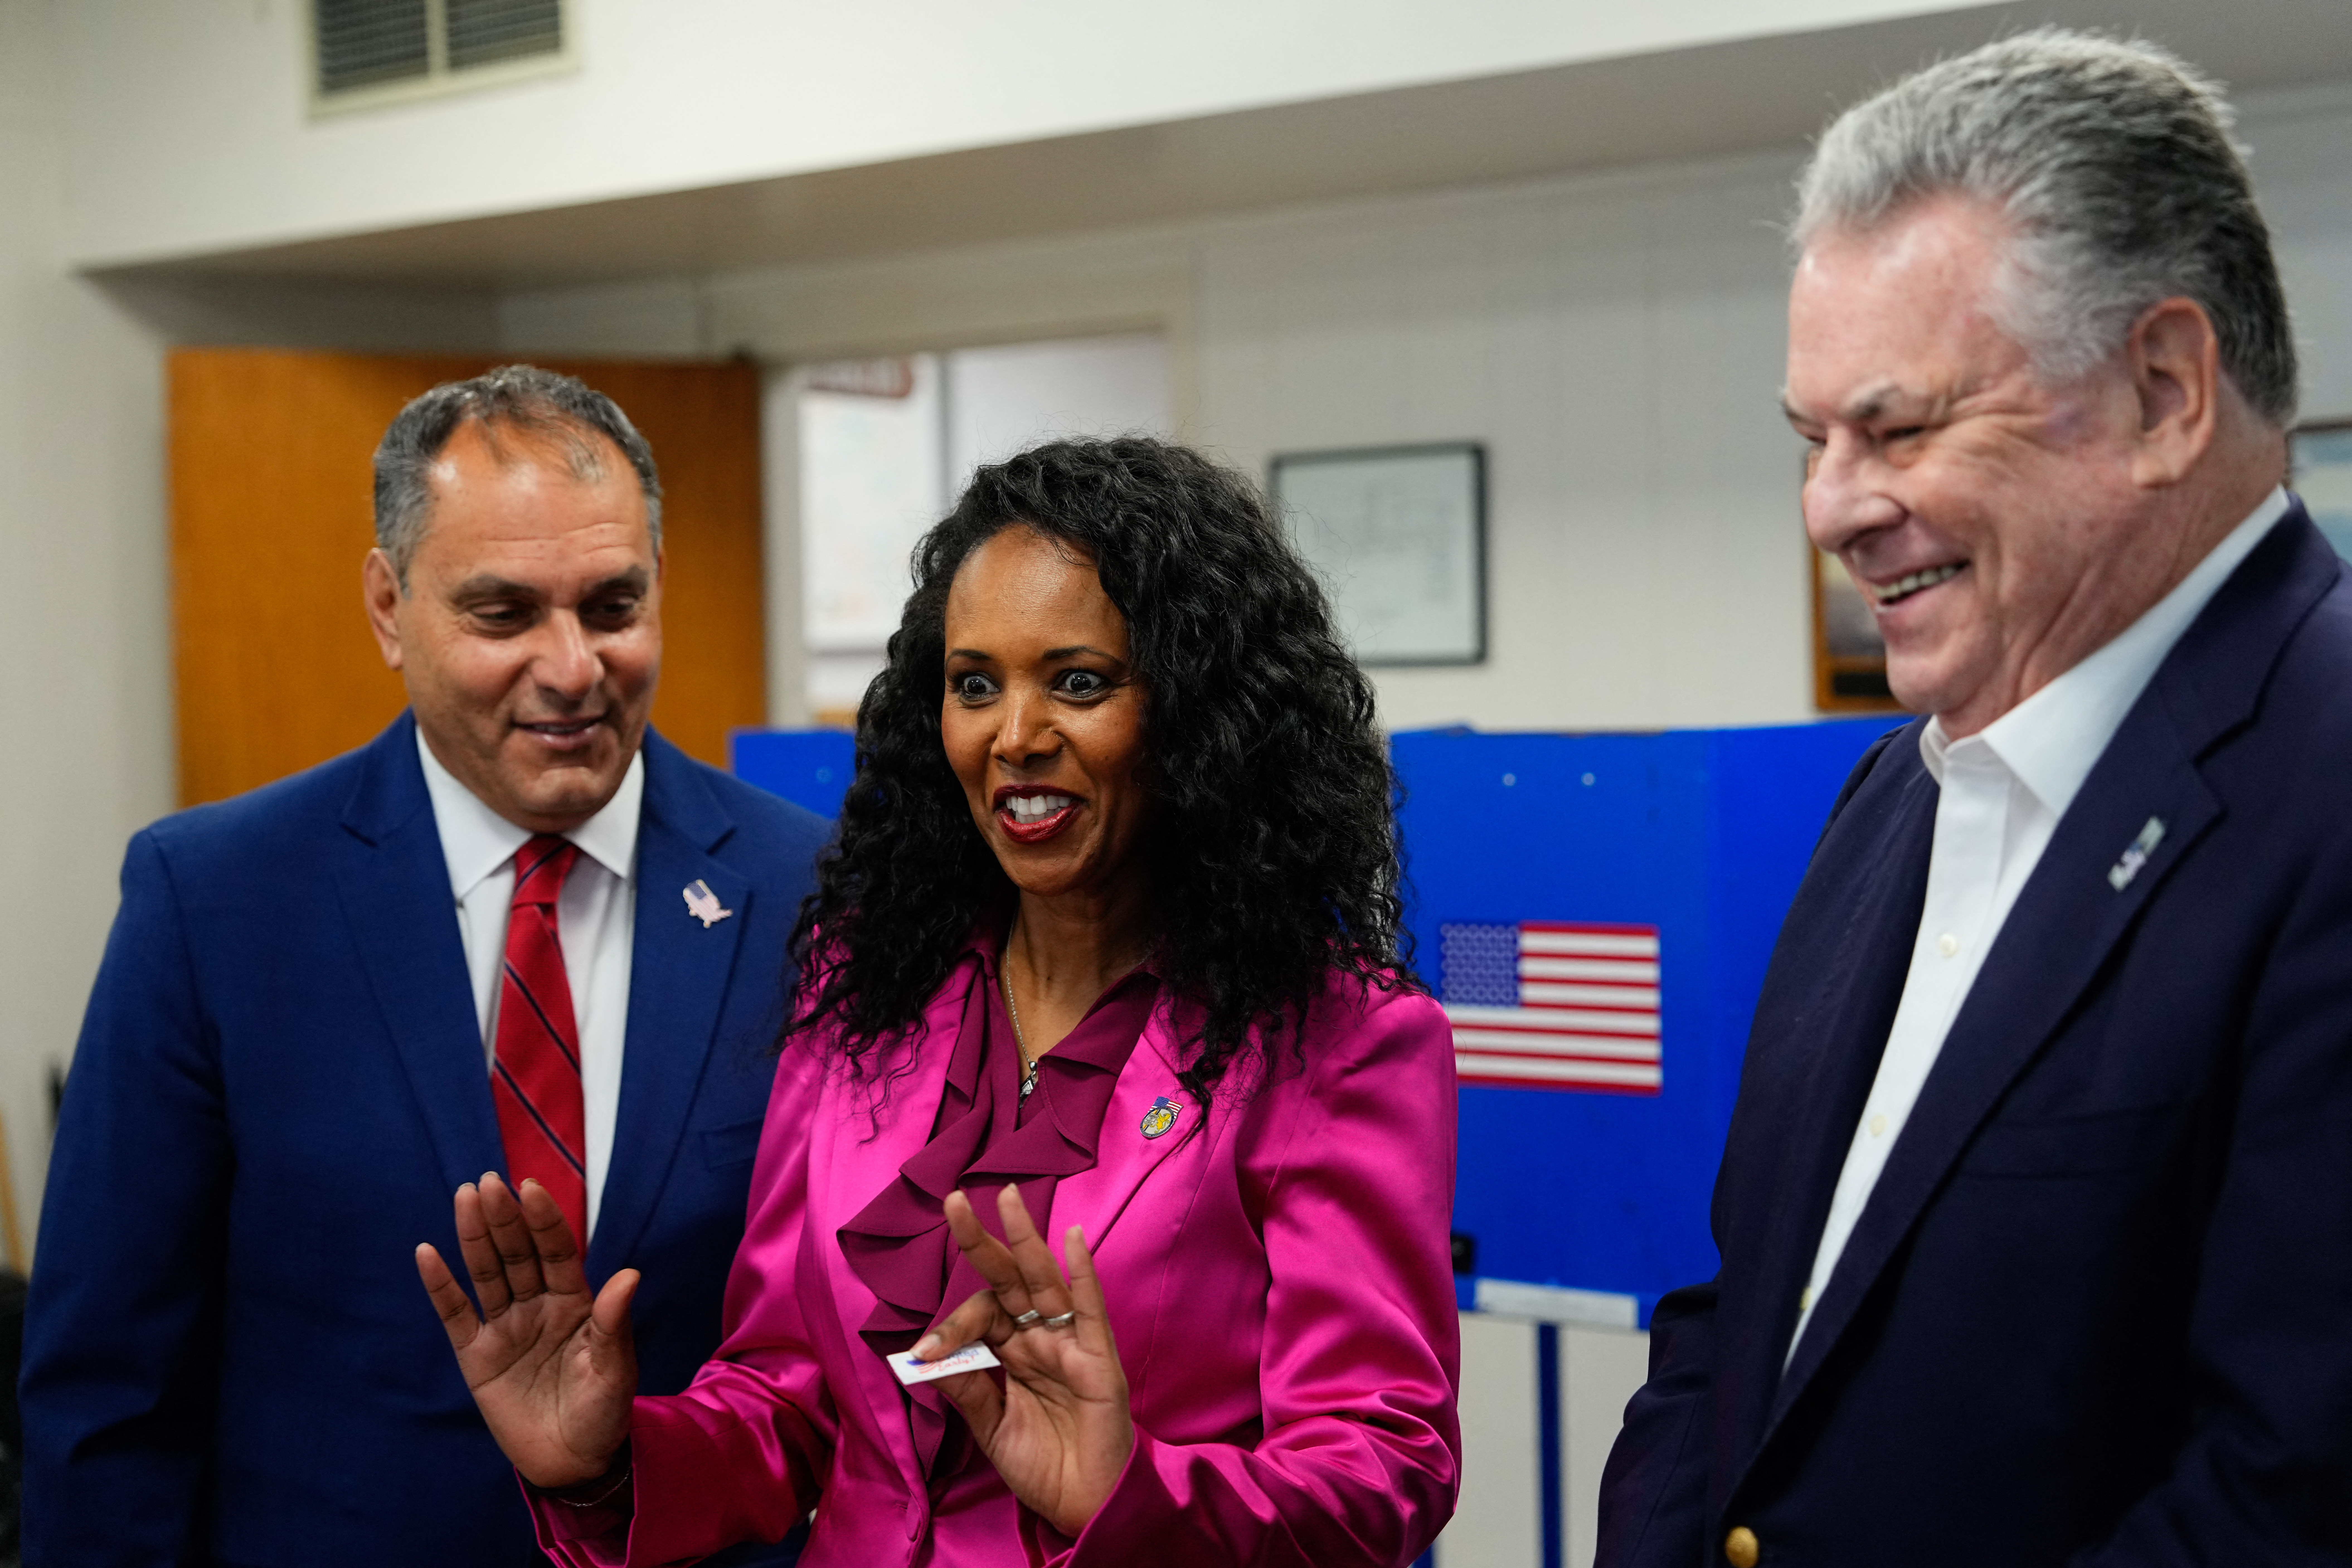 Mazi Melesa Pilip (C), US Republican Congressional candidate for New York's 3rd district, stands with (L-R) Town of Oyster Bay Supervisor Joseph Saladino and former US Representative Peter King, Republican from New York, after voting early at a polling station in Massapequa, New York, on February 9, 2024. Pilip is running against former US Representative Tom Suozzi, Democrat from New York, in a special election to replace expelled former US Representative George Santos. The special election will take place on February 13, 2024. (Photo by Adam Gray / POOL / AFP) (Photo by ADAM GRAY/POOL/AFP via Getty Images)